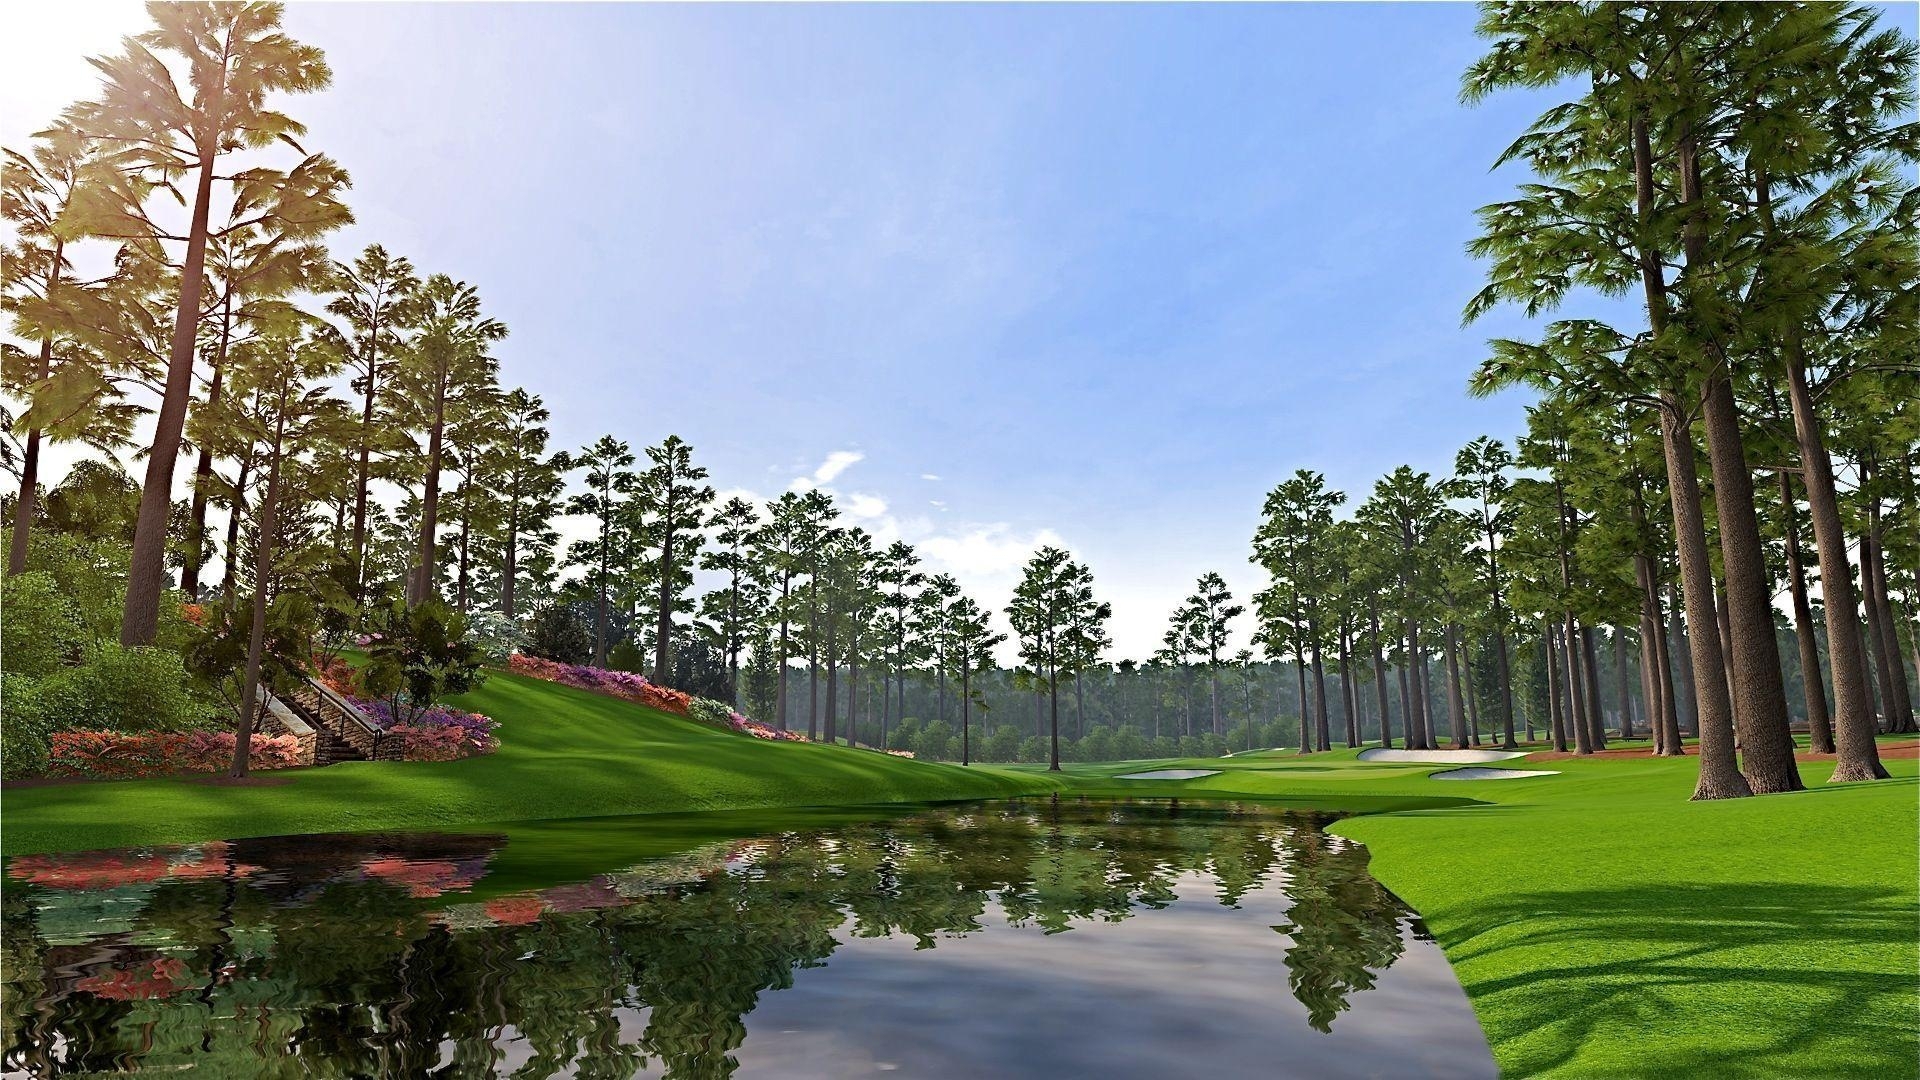 10 New Augusta National Wallpaper Hd FULL HD 1920×1080 For PC Background